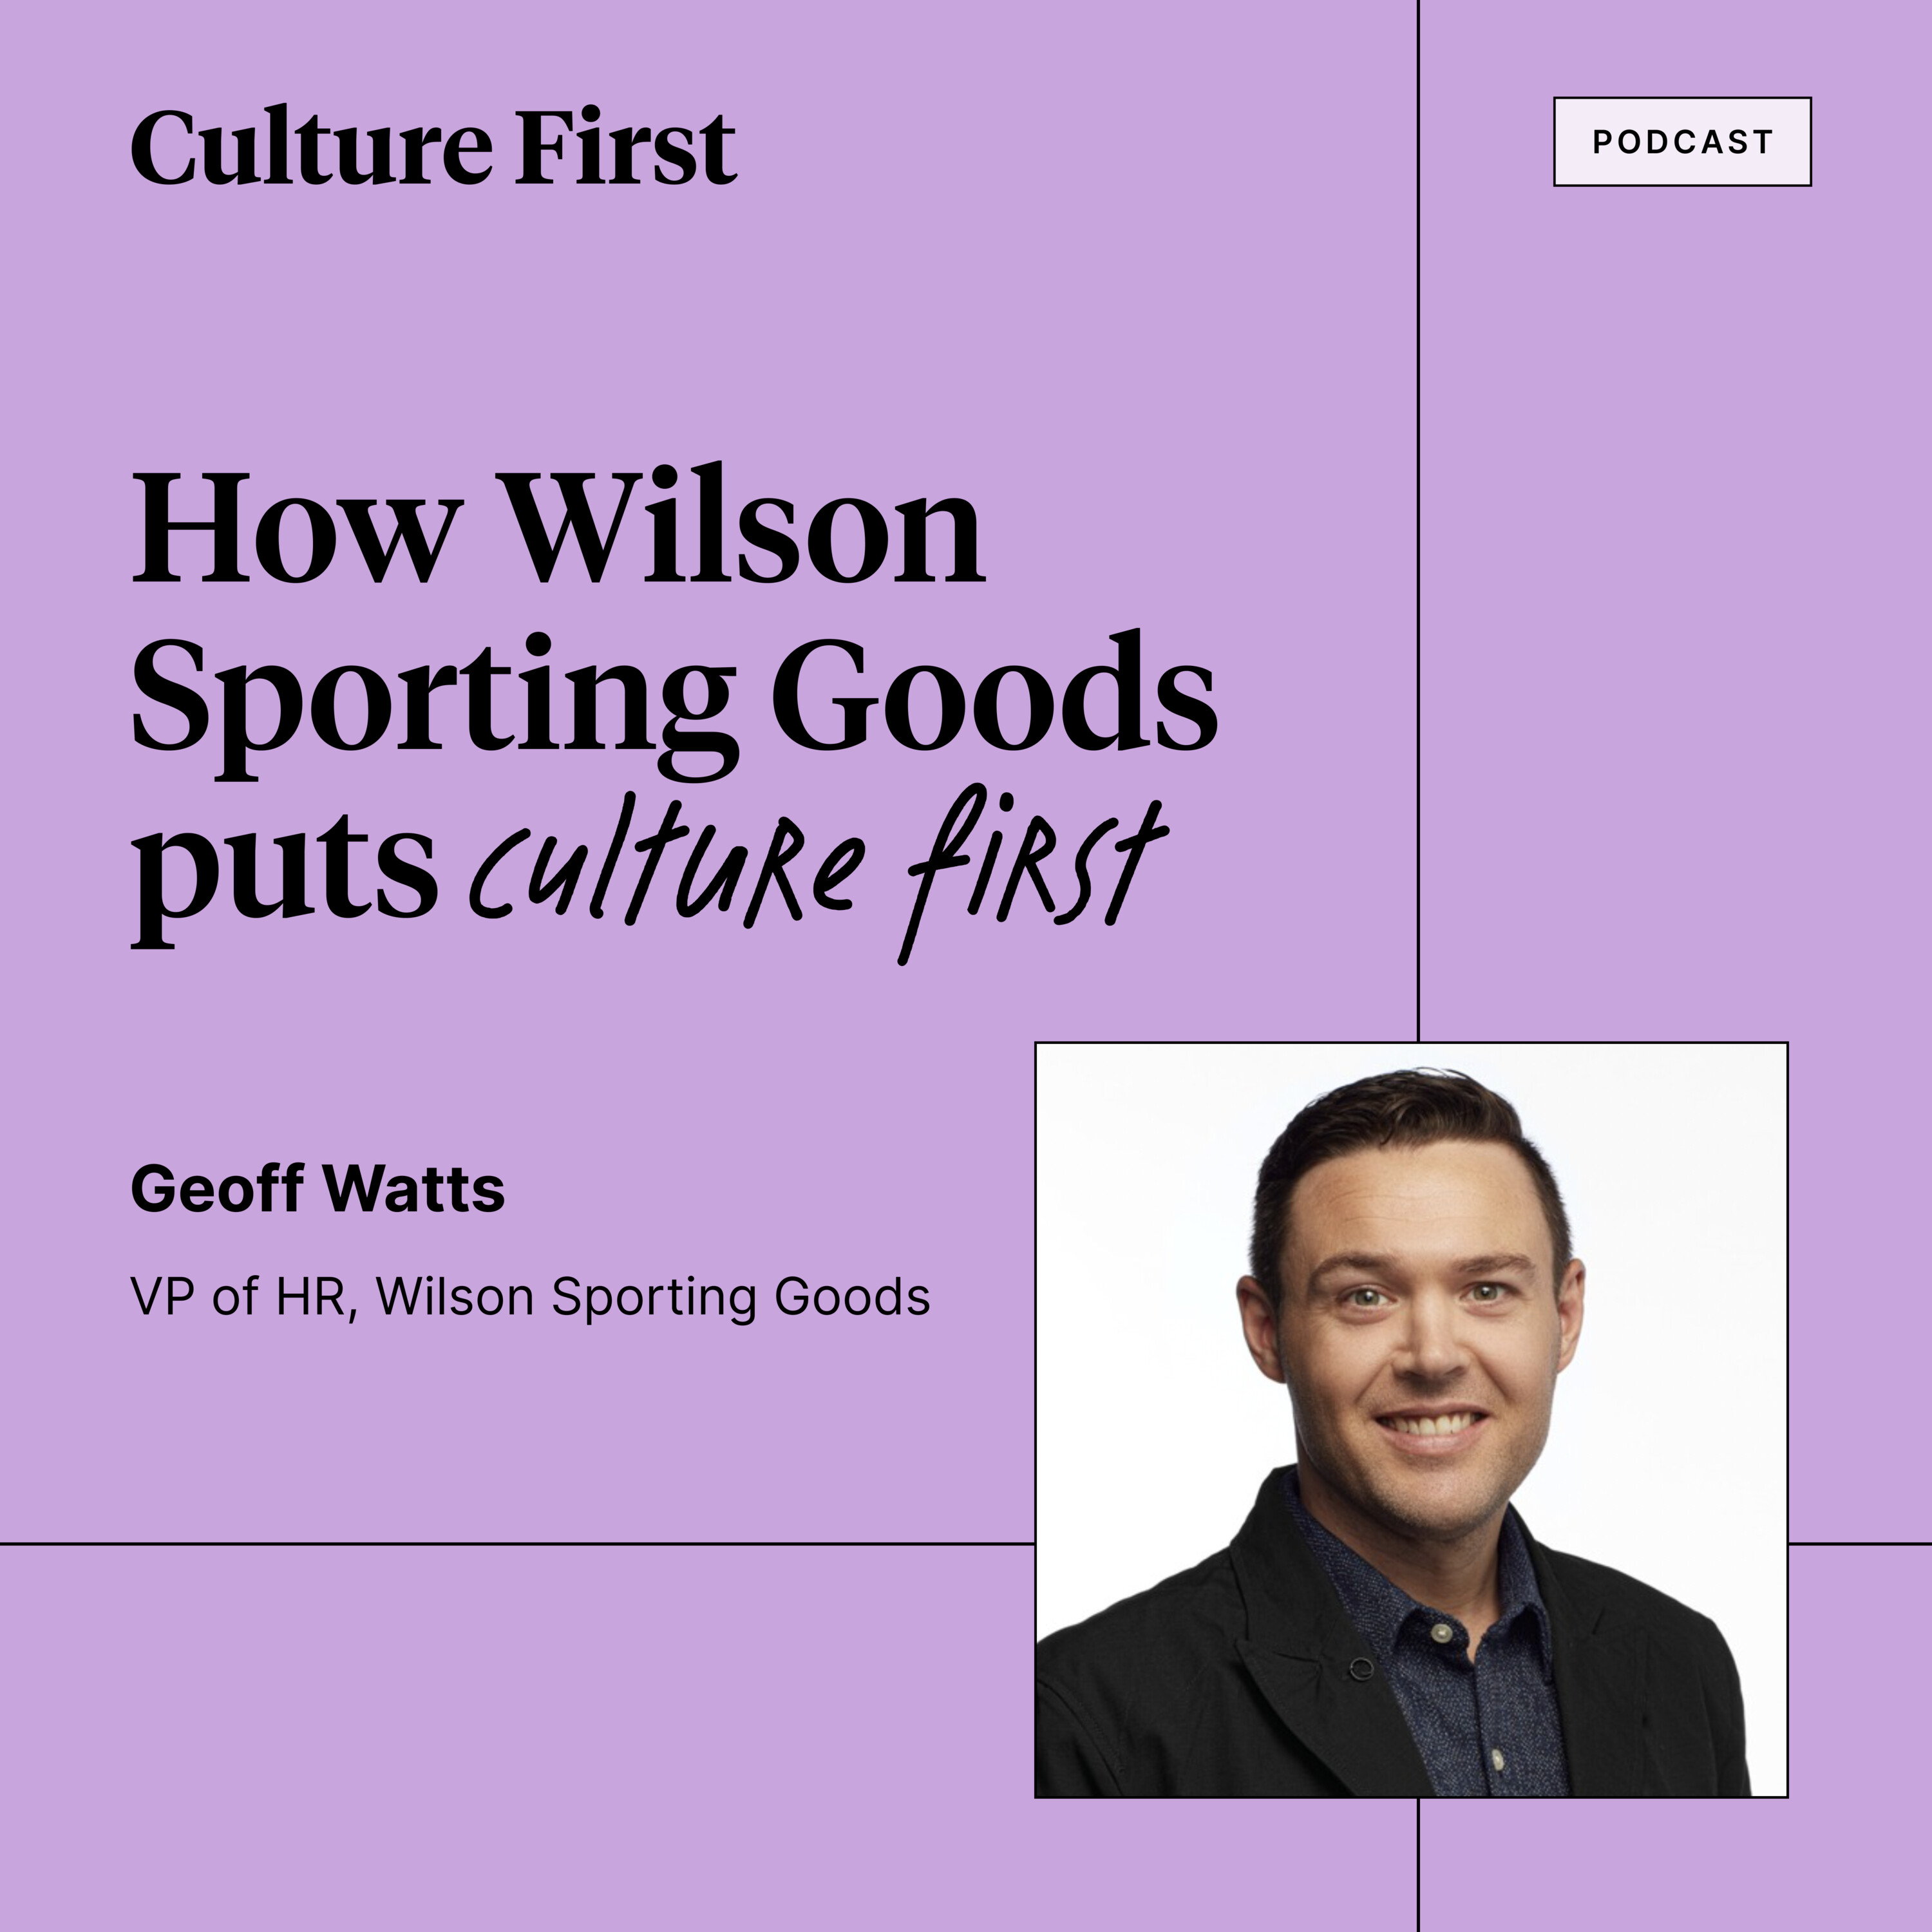 How Wilson Sporting Goods puts Culture First, with Geoff Watts VP of HR, Part 2 of 3. 